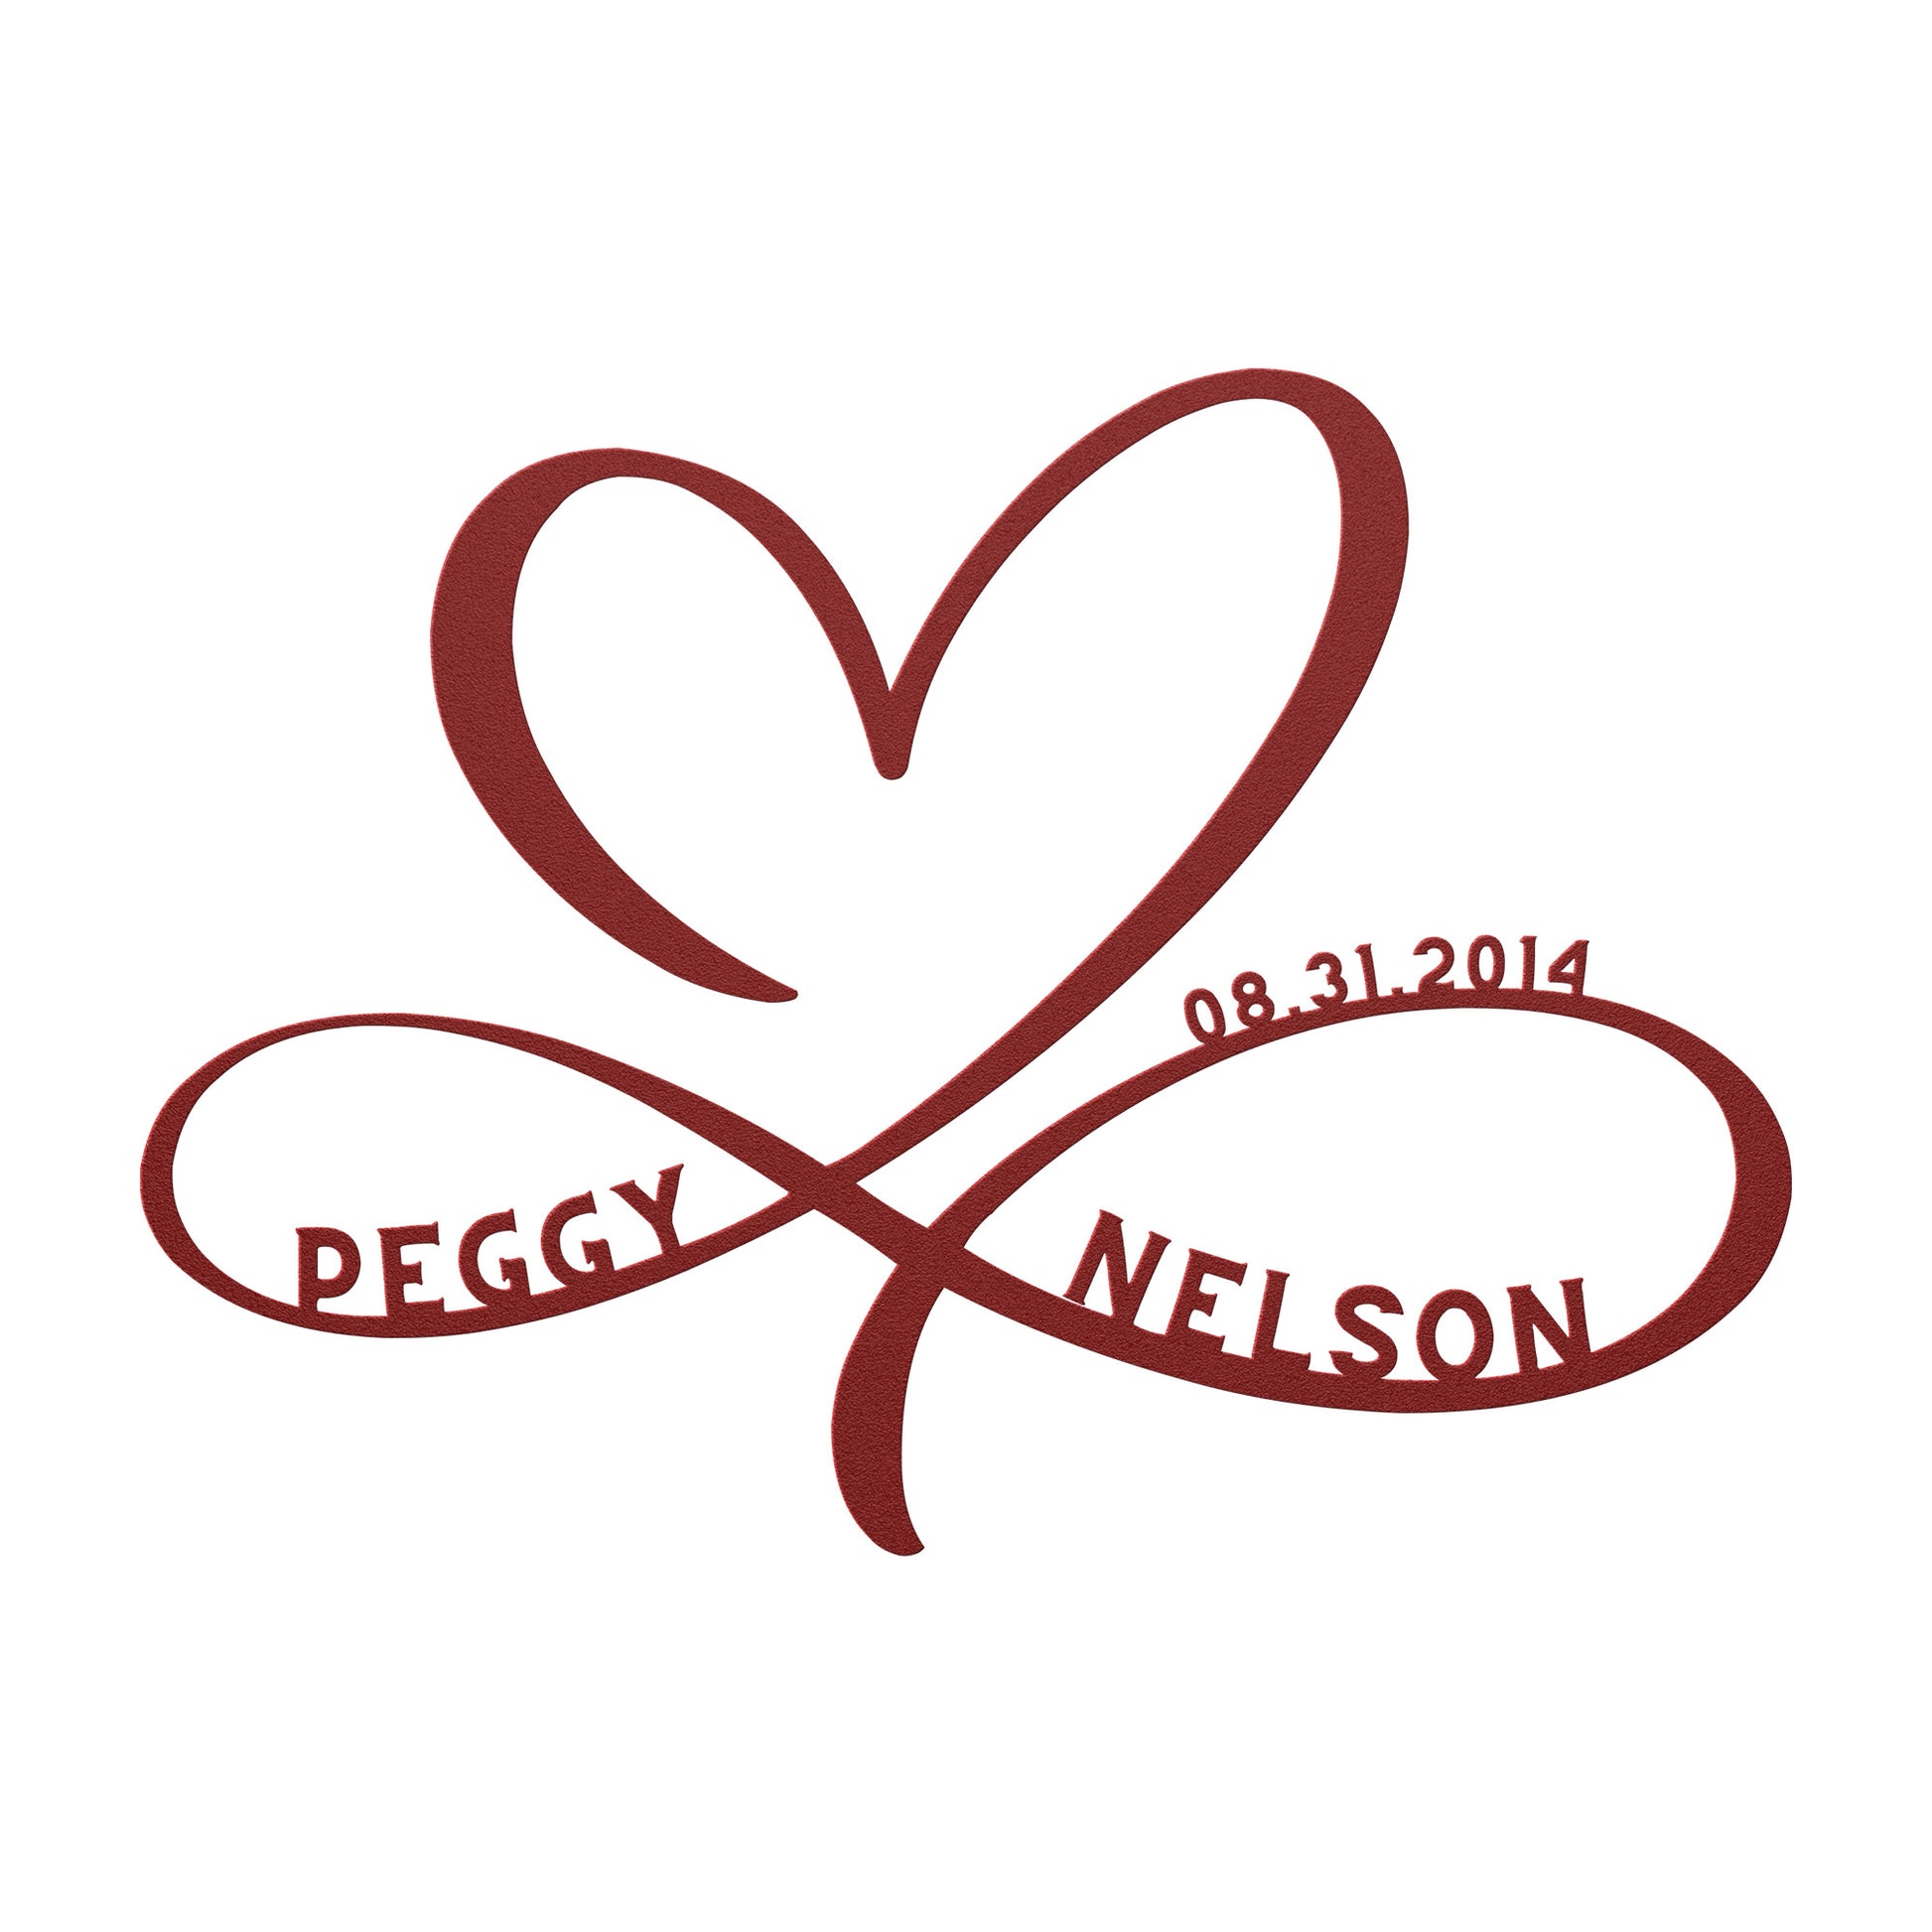 Peggy Nelson wedding logo on a teelaunch Personalized Infinity Love Heart Metal Art Sign.